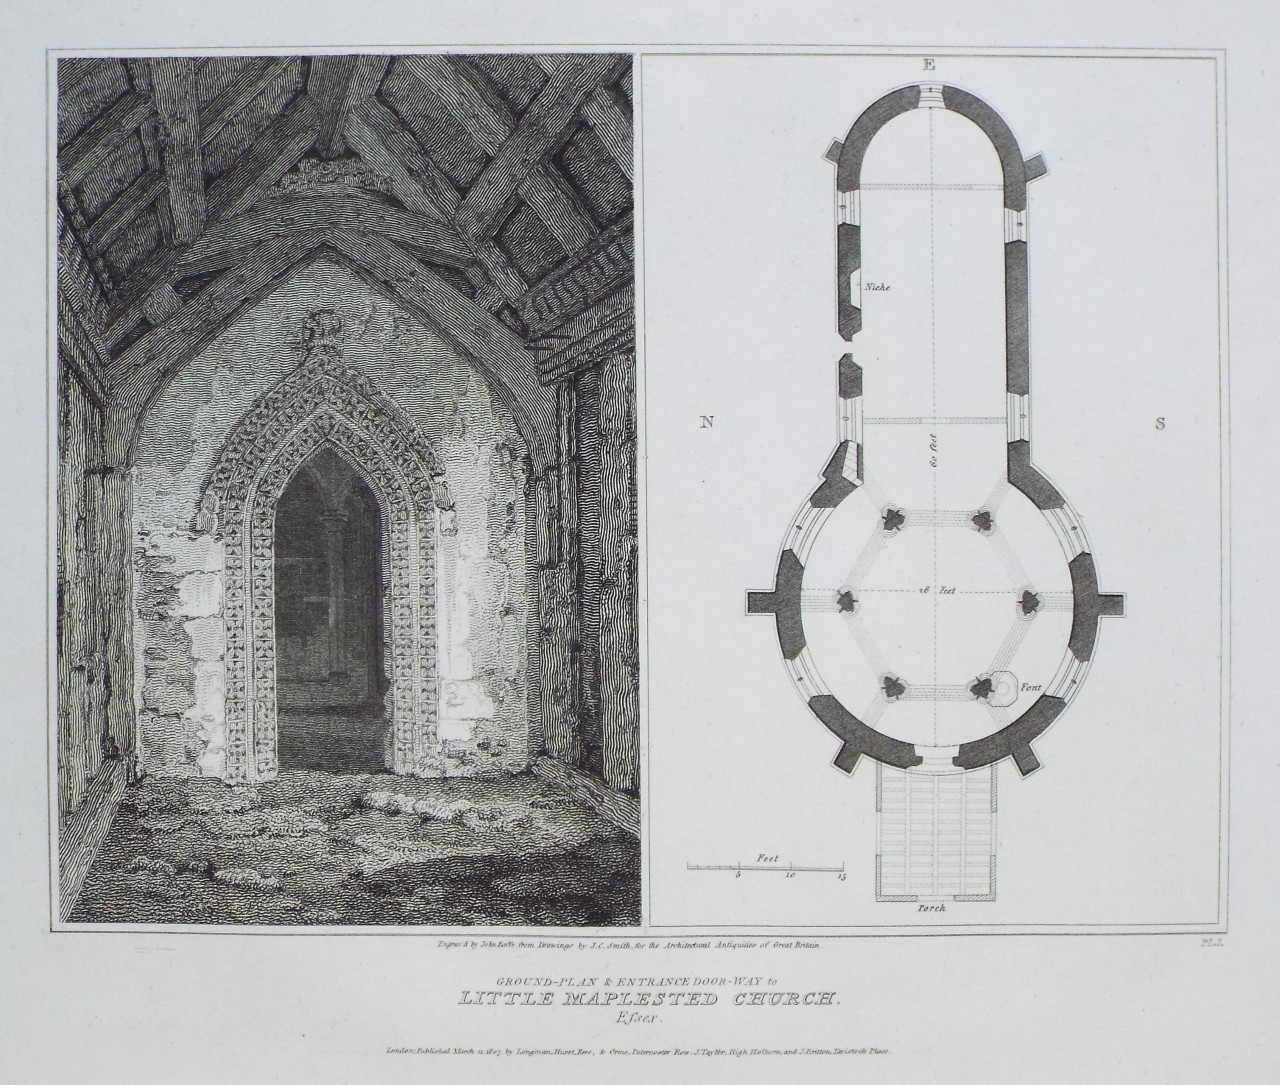 Print - Ground-plan & Entrance Door-way to Little Maplested Church, Essex. - Roffe